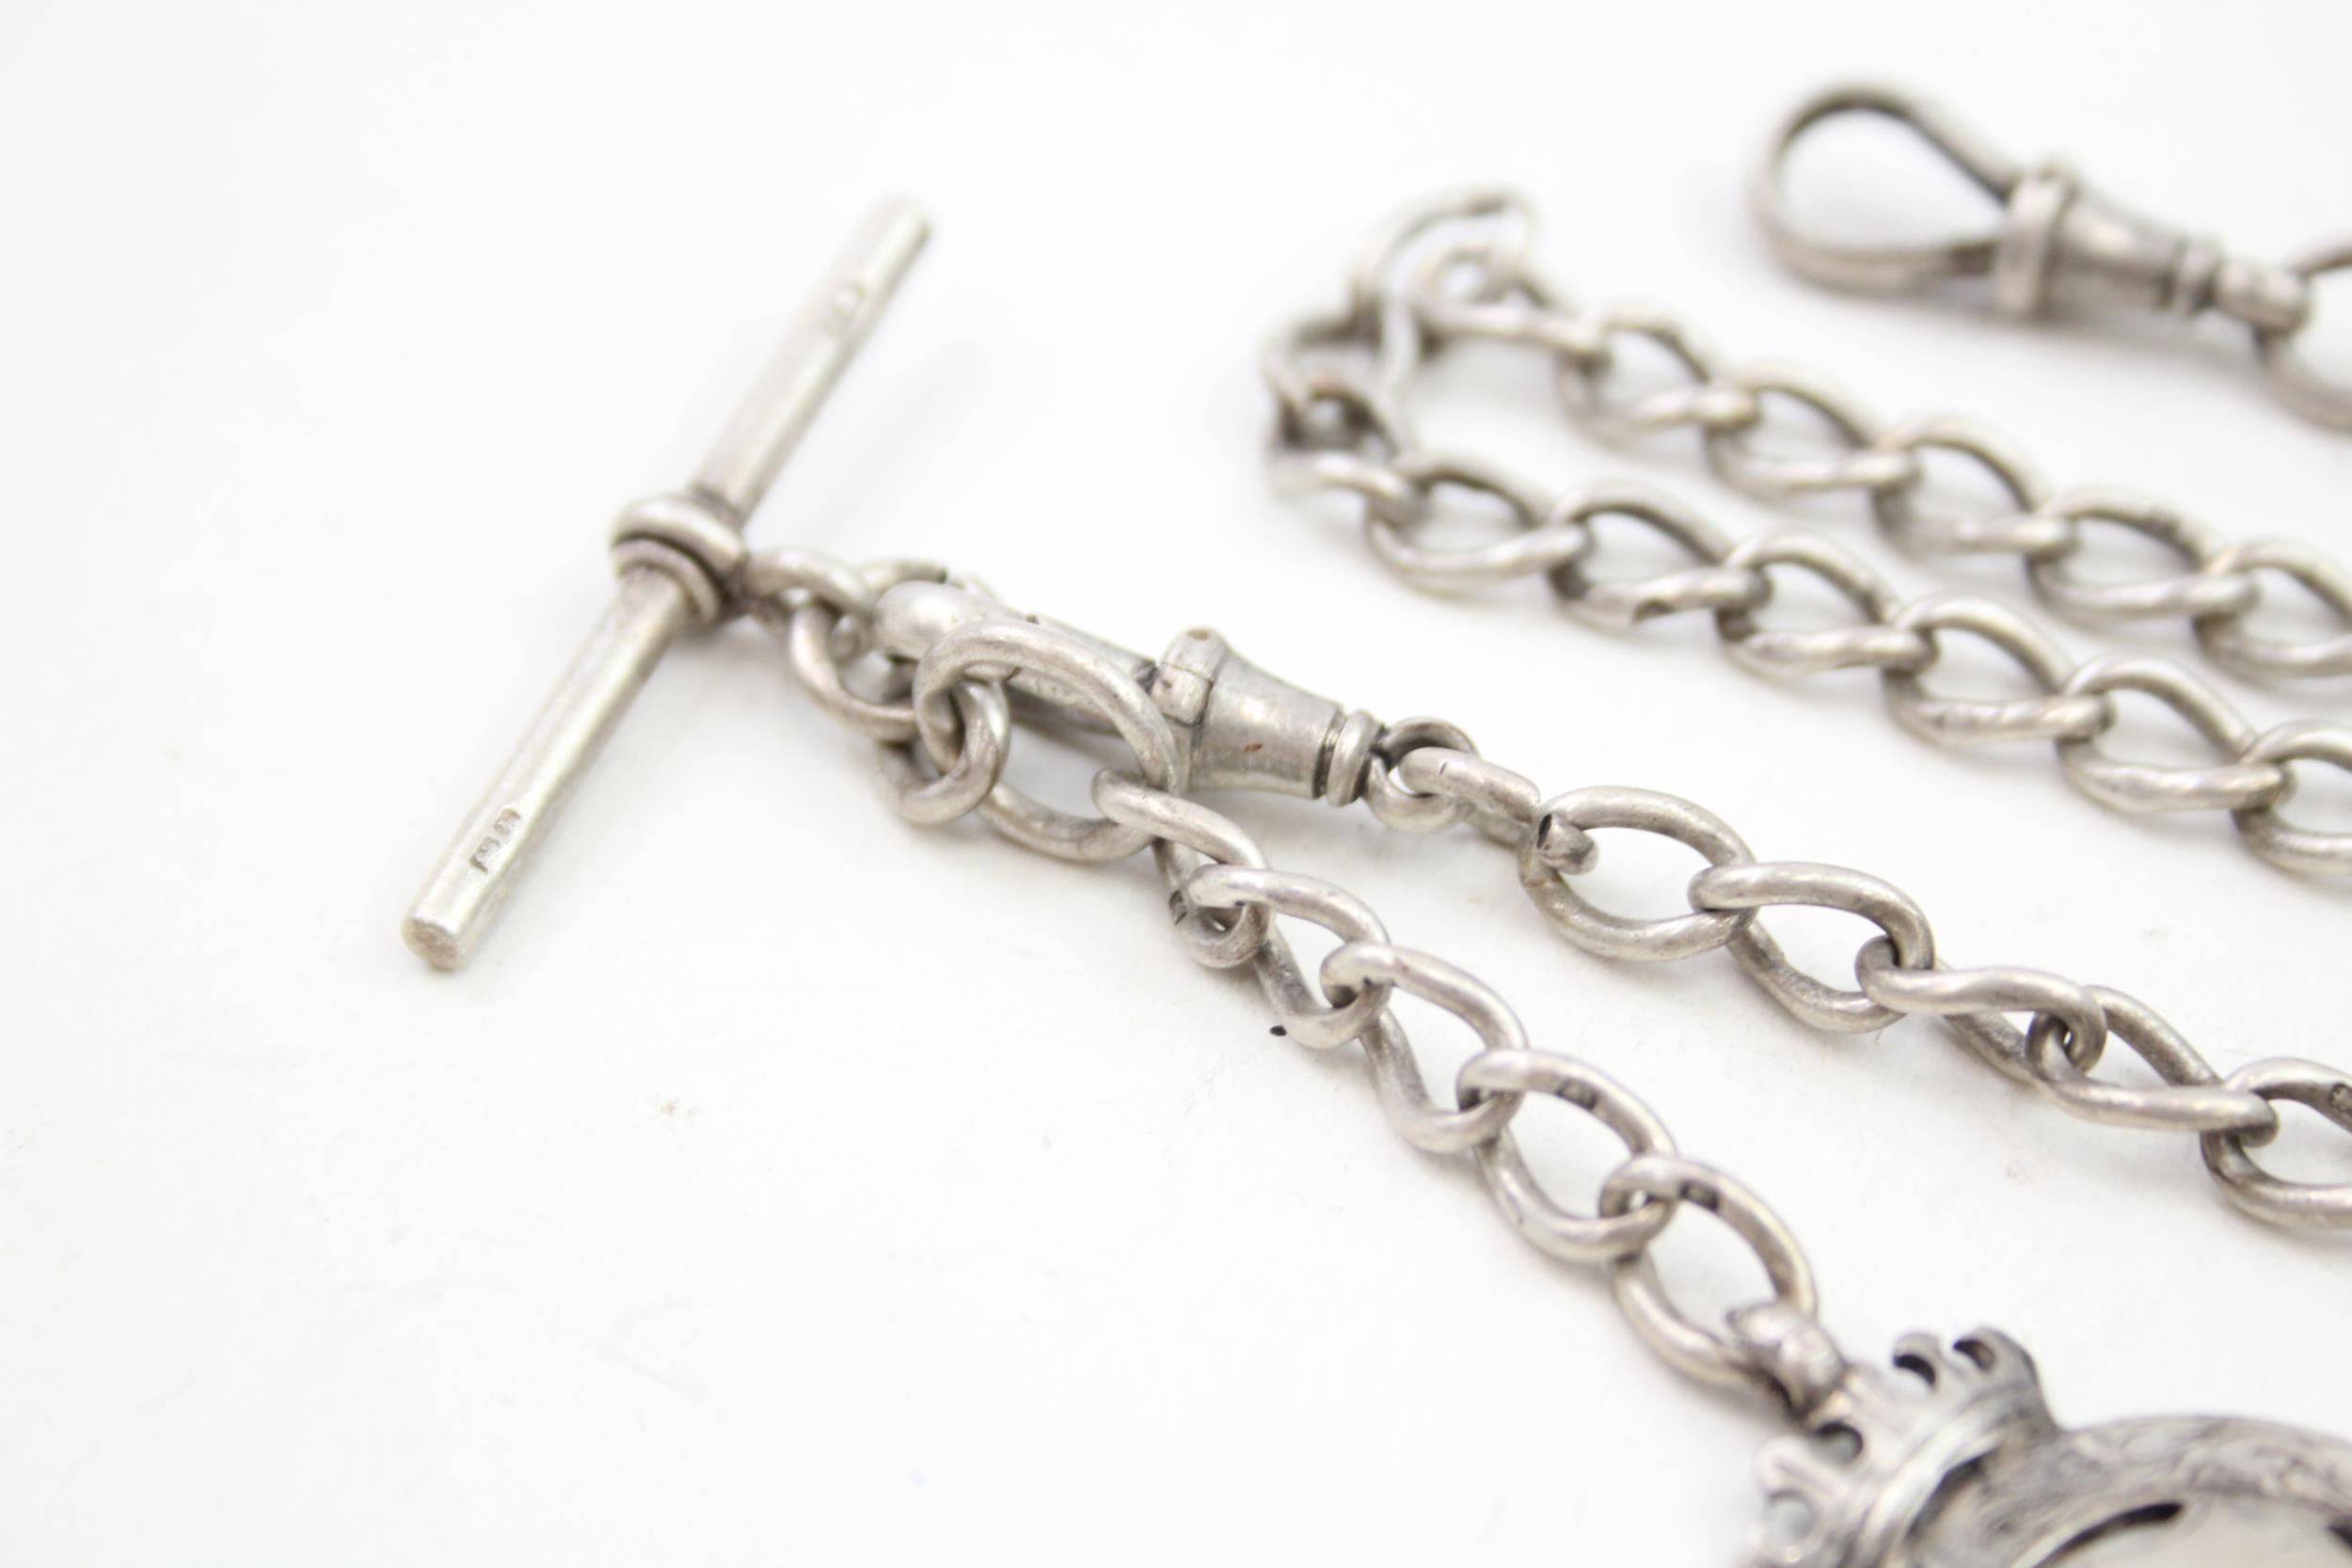 Antique Edwardian sterling silver watch chain and fob (48g) - Image 3 of 5